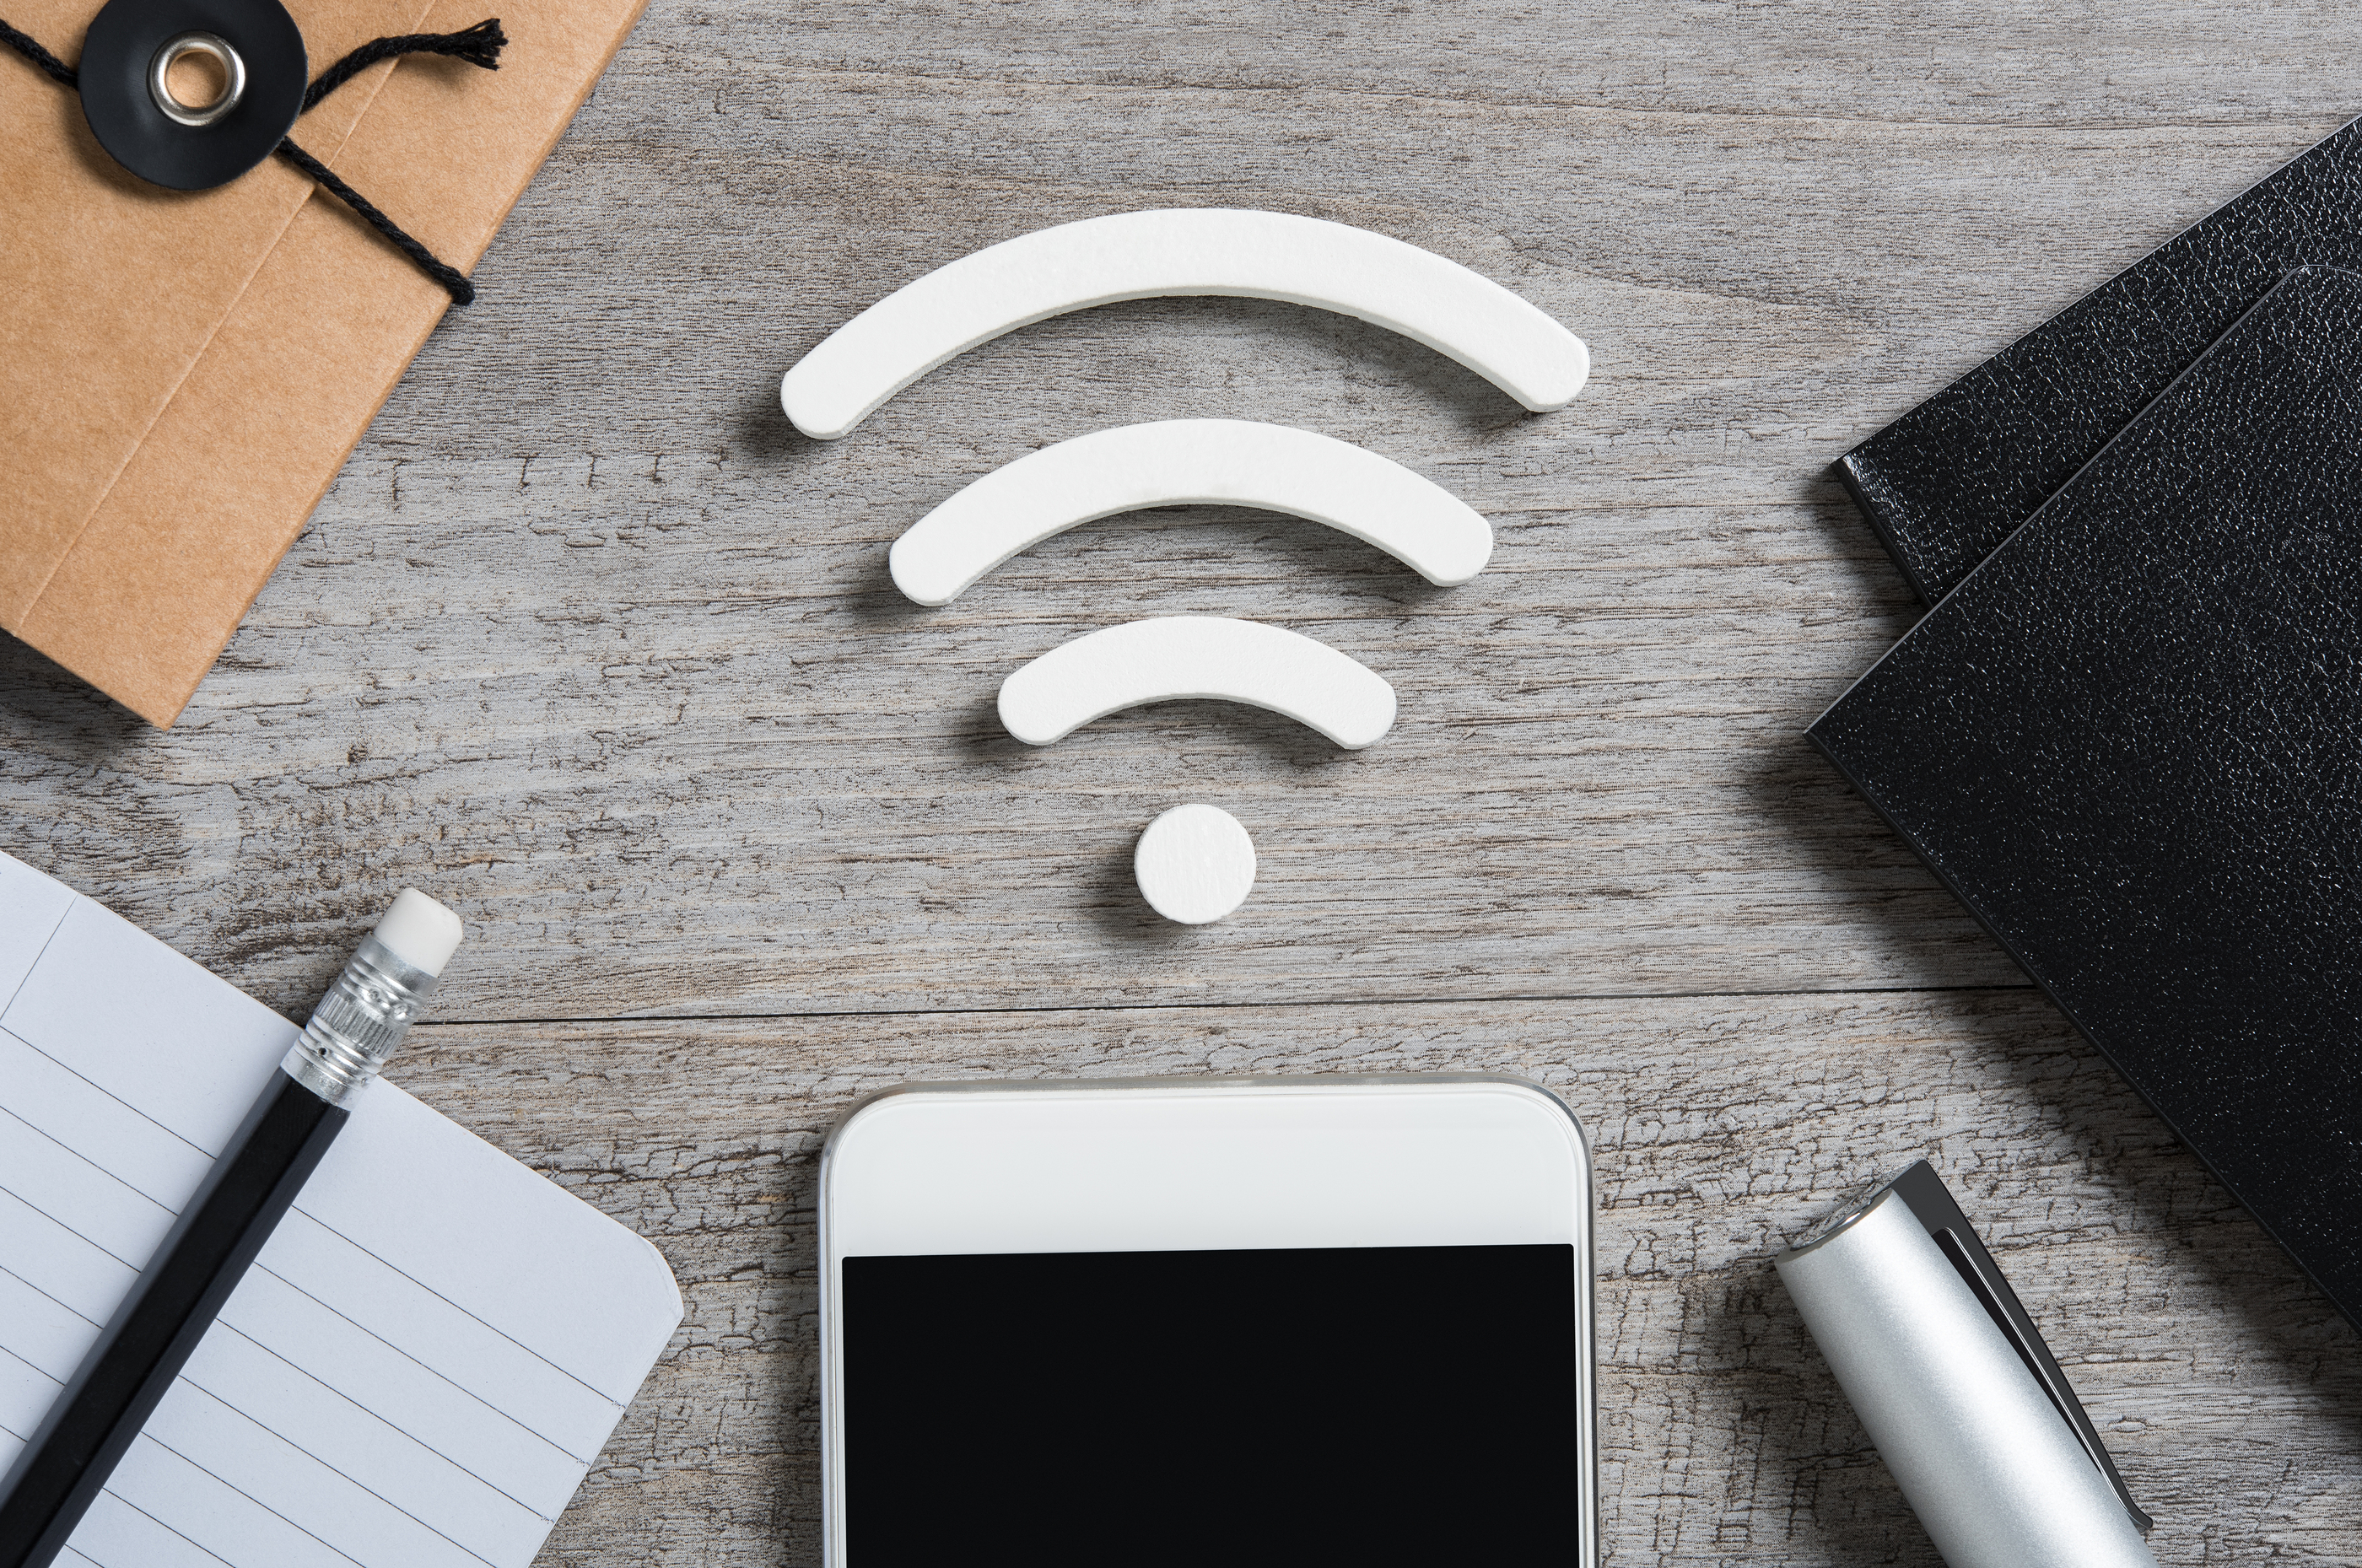 How Can I Go Online Safely When On a Public Wi-Fi?